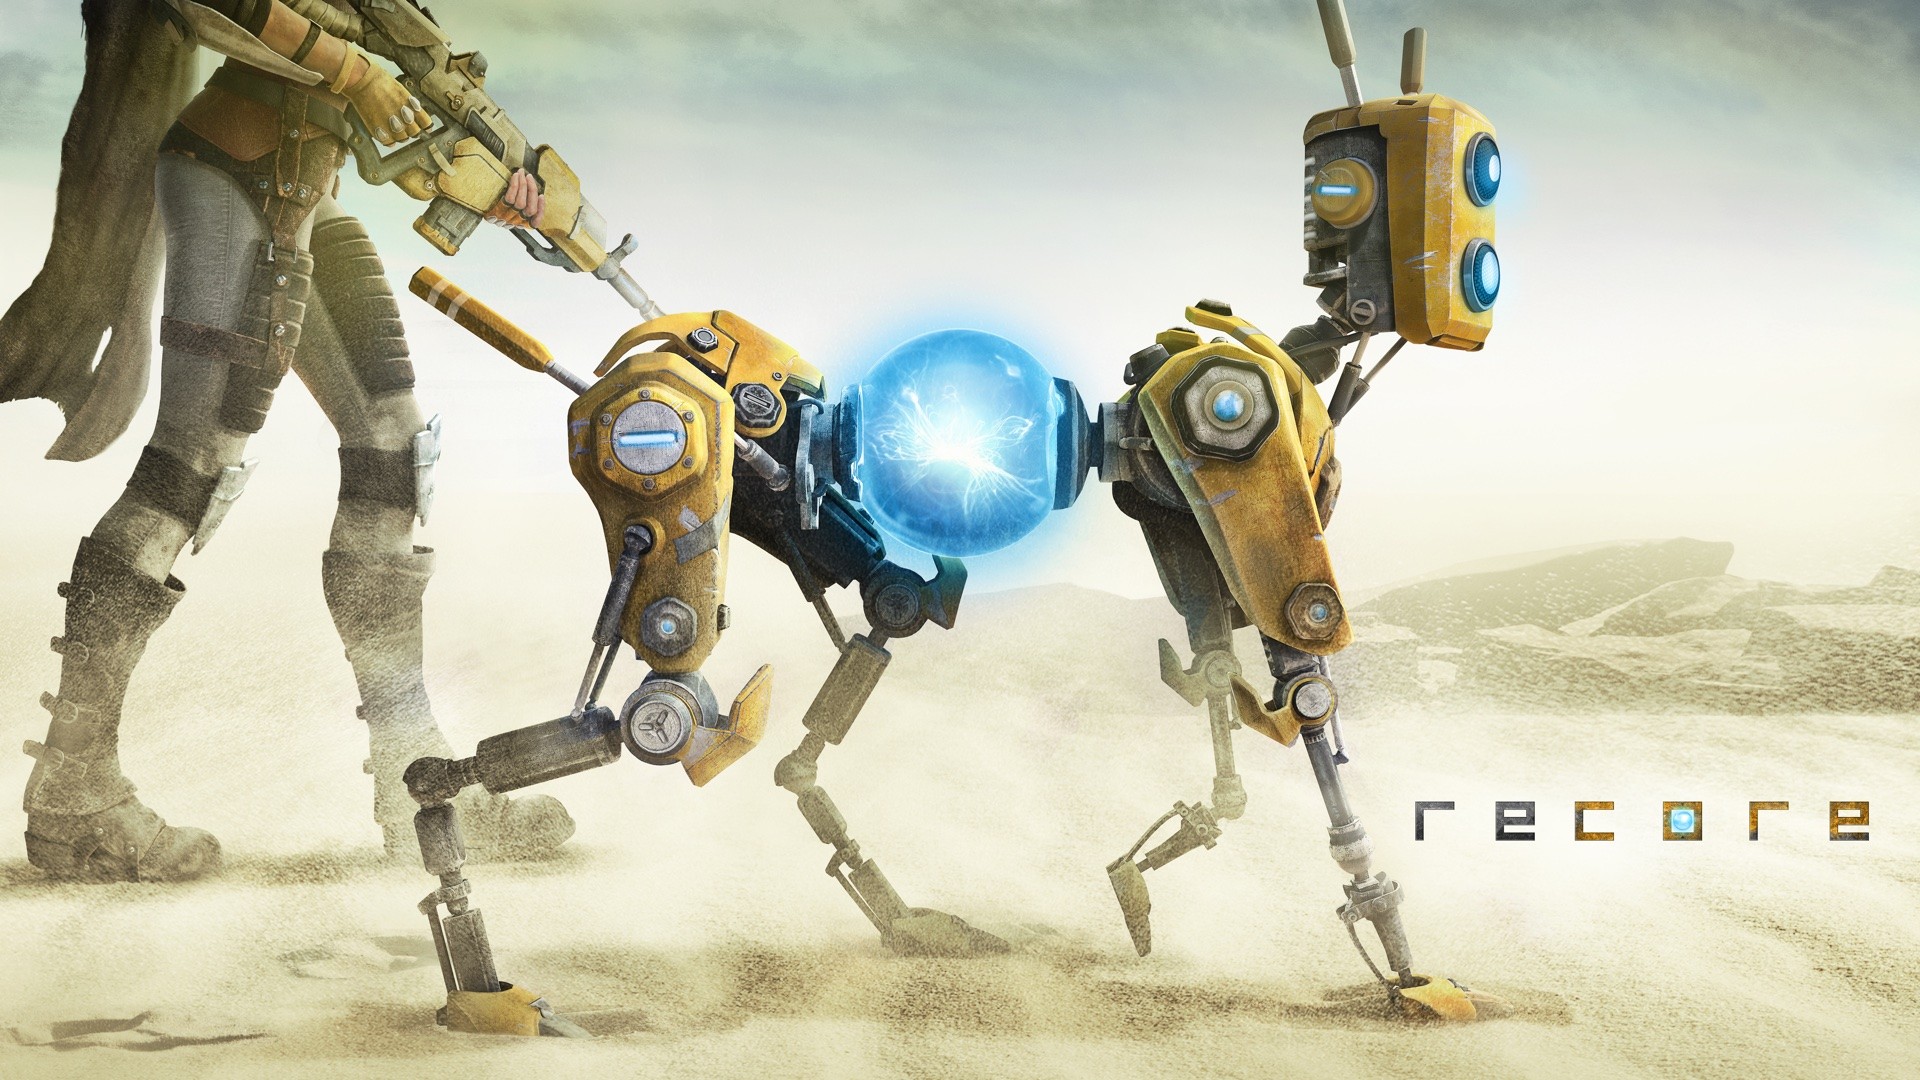 General 1920x1080 ReCore video games science fiction concept art Xbox Game Studios